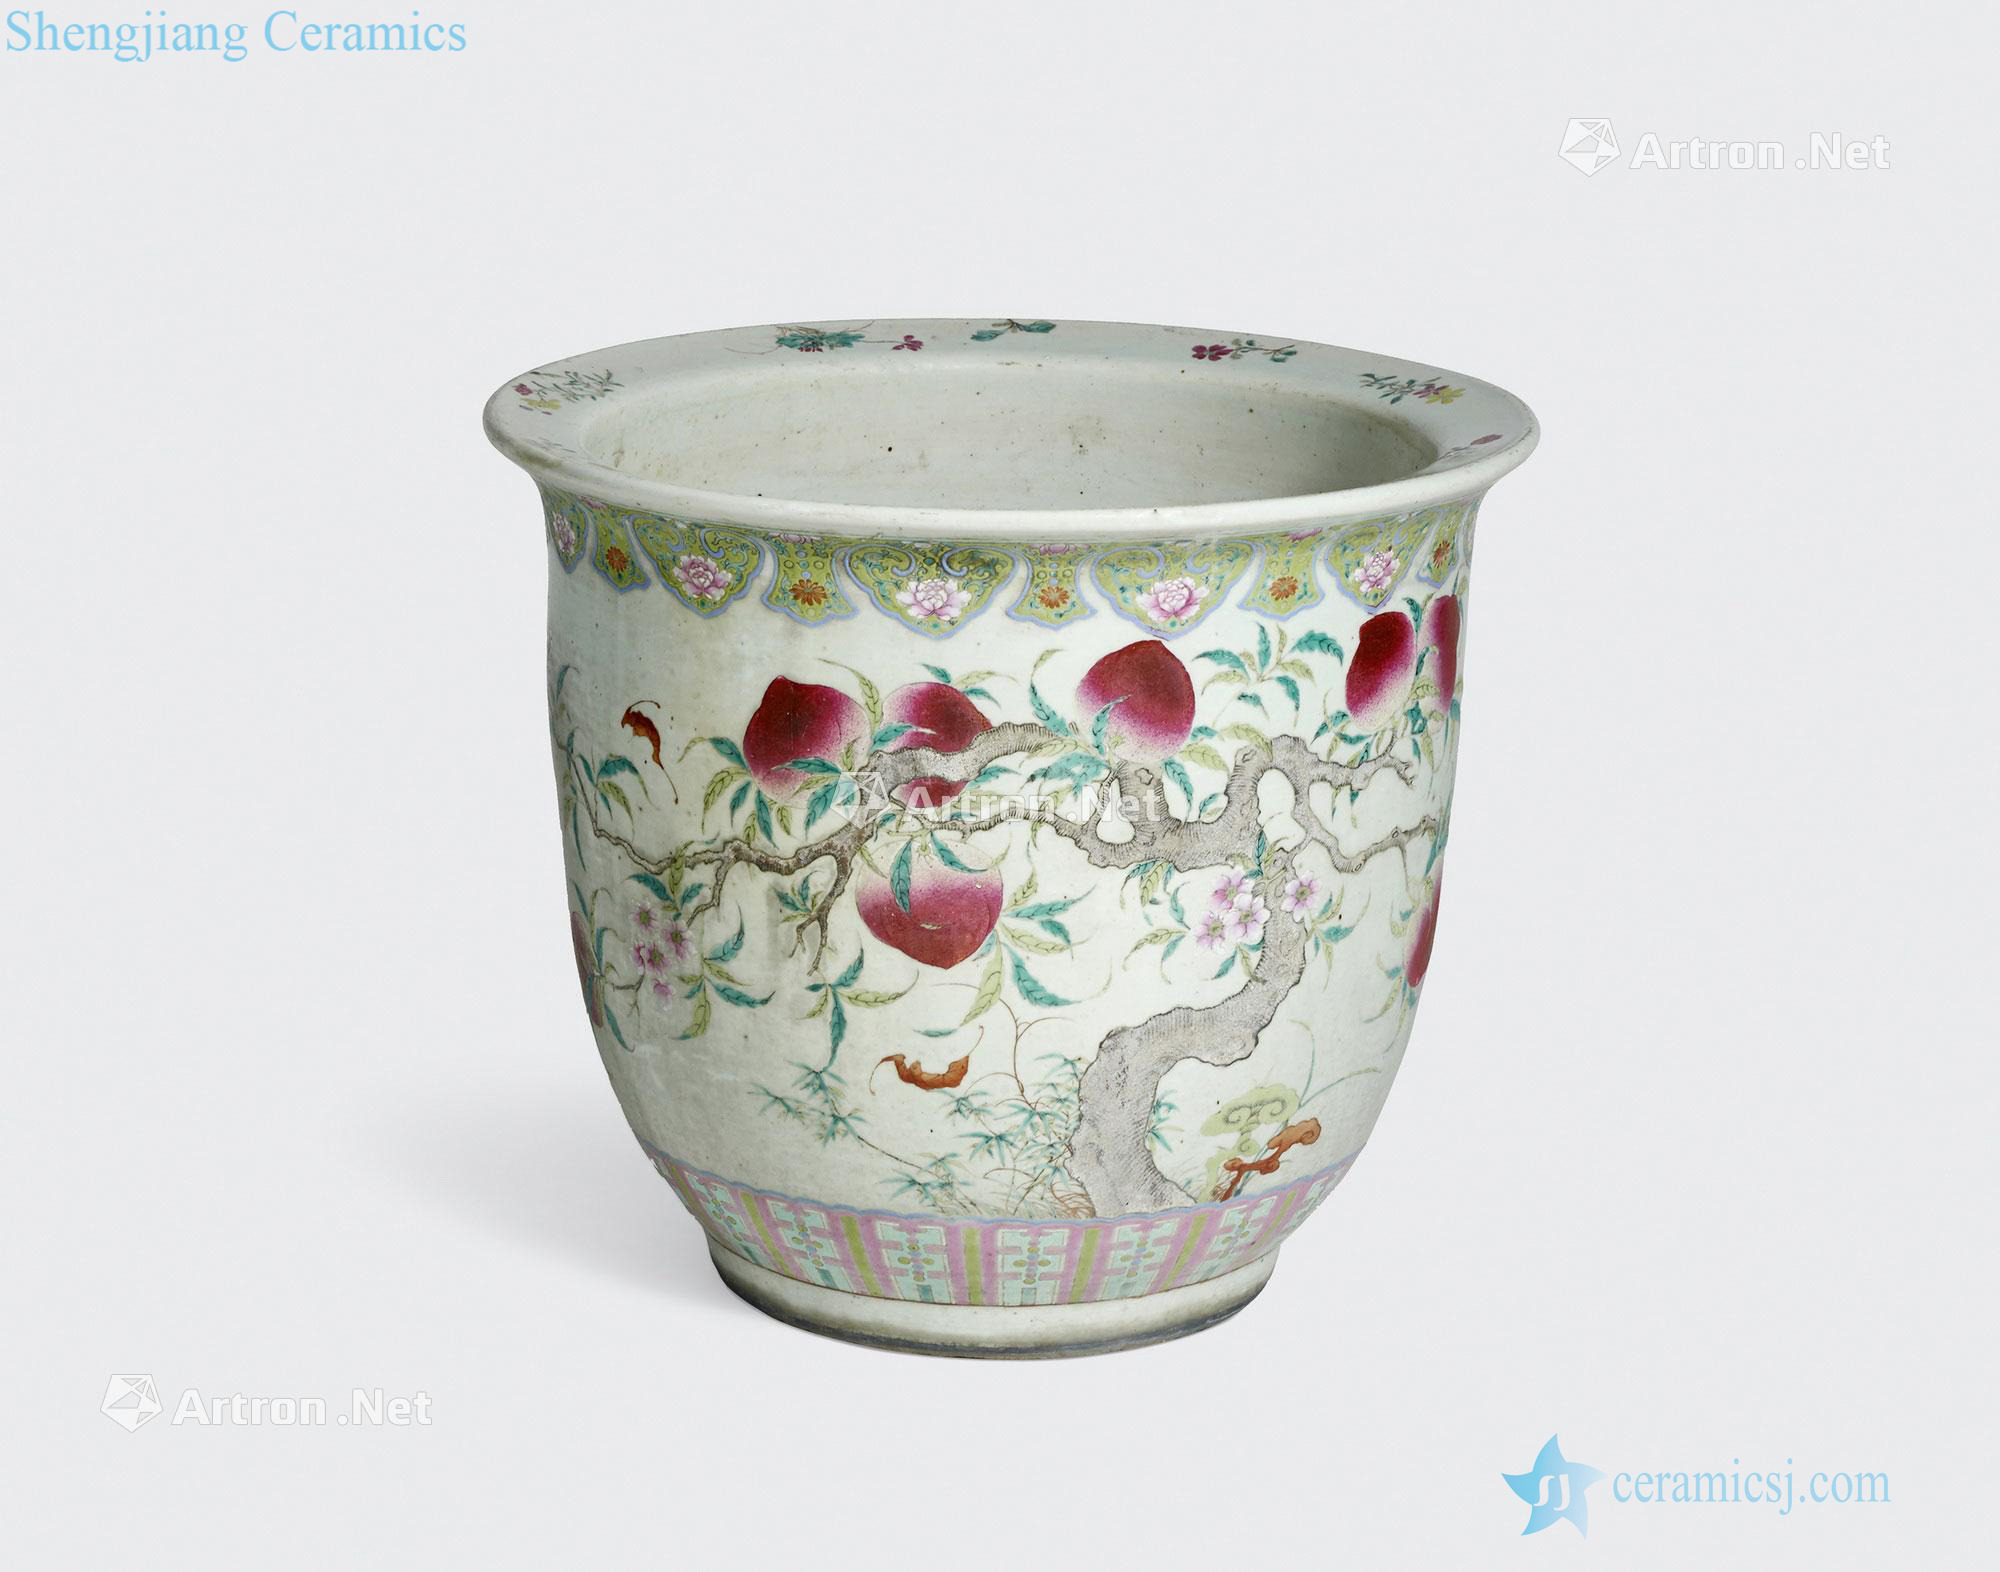 The newest the Qing/Republic period A LARGE FAMILLE ROSE ENAMELED PLANTER WITH PEACHES AND BATS DESIGN